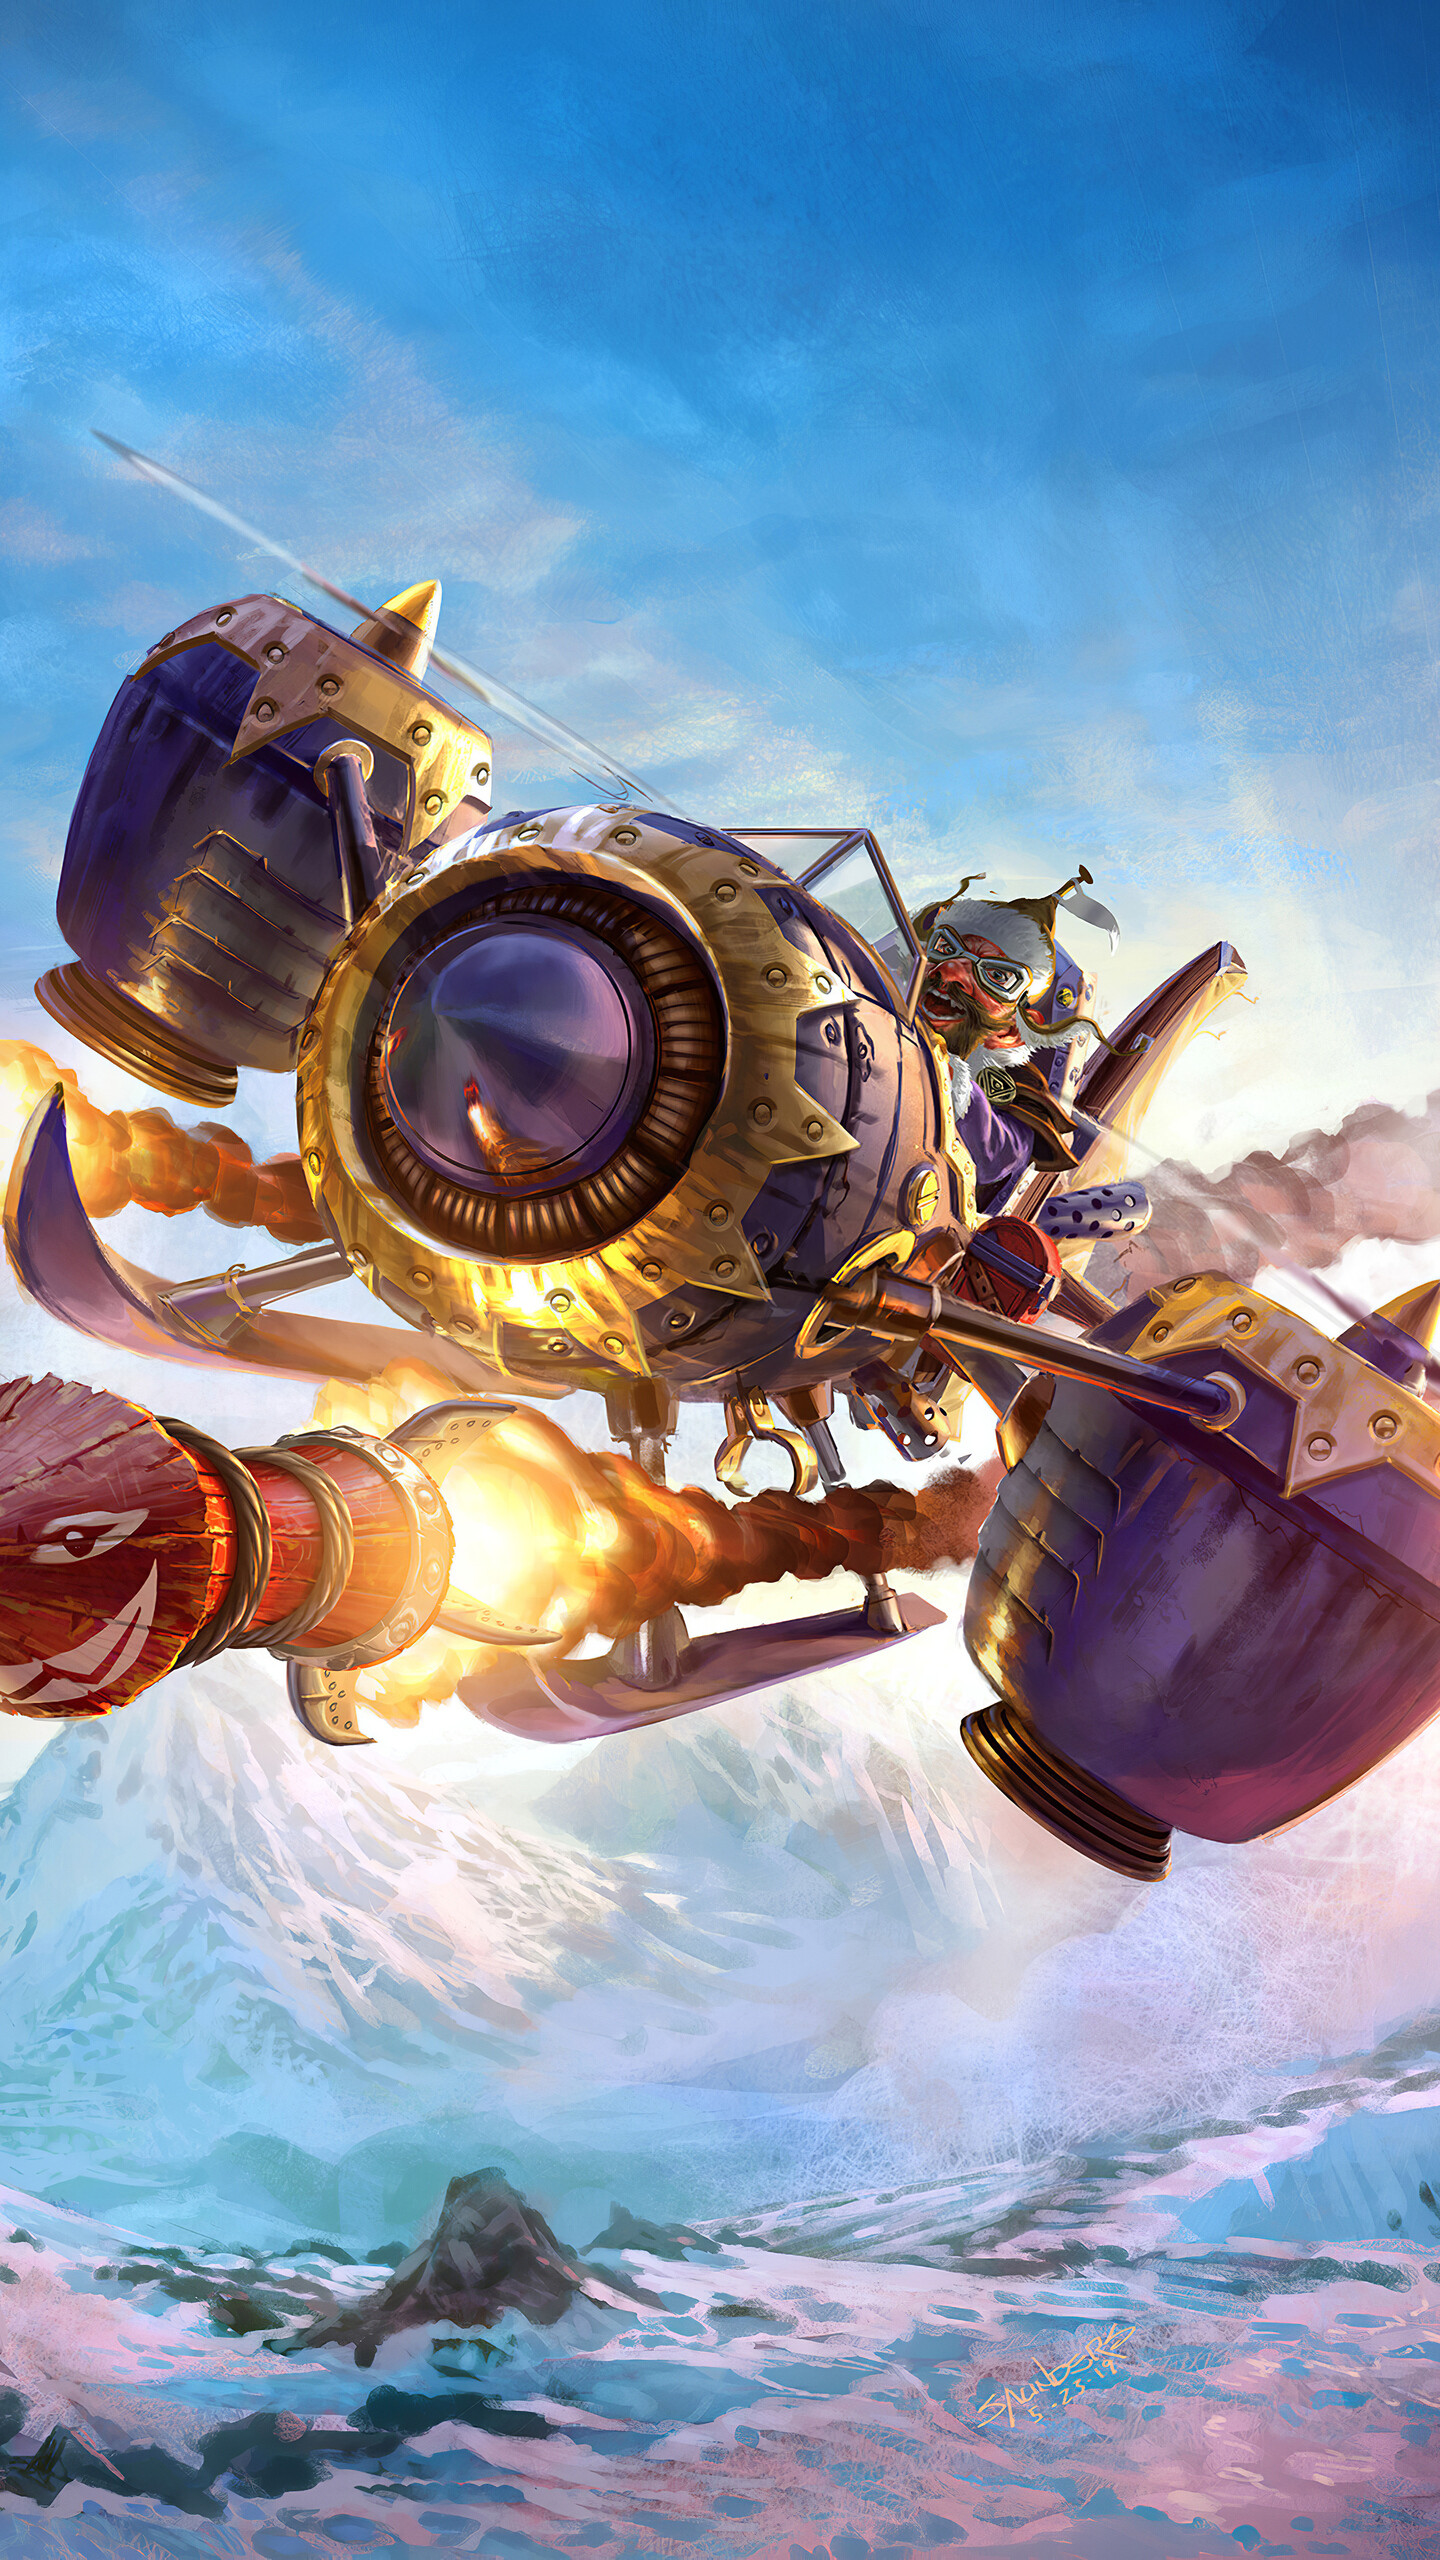 Hearthstone: The game where players can complete quests and earn prizes to gain gold and powerful new cards for their collection, constructing formidable decks with which to do battle. 1440x2560 HD Wallpaper.